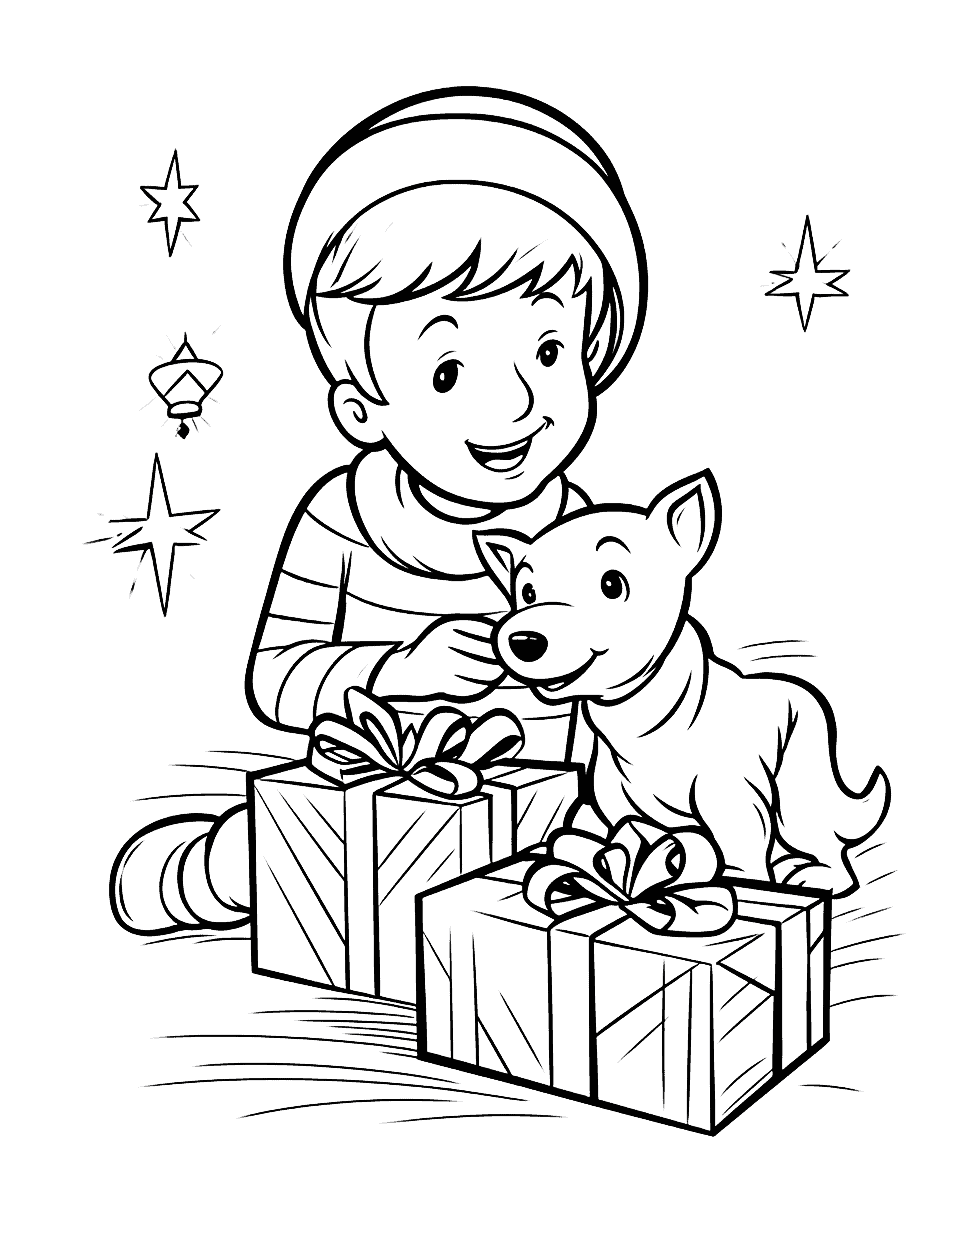 Christmas Puppy Surprise Coloring Page - A delighted kid unboxing a Christmas gift with his playful puppy.